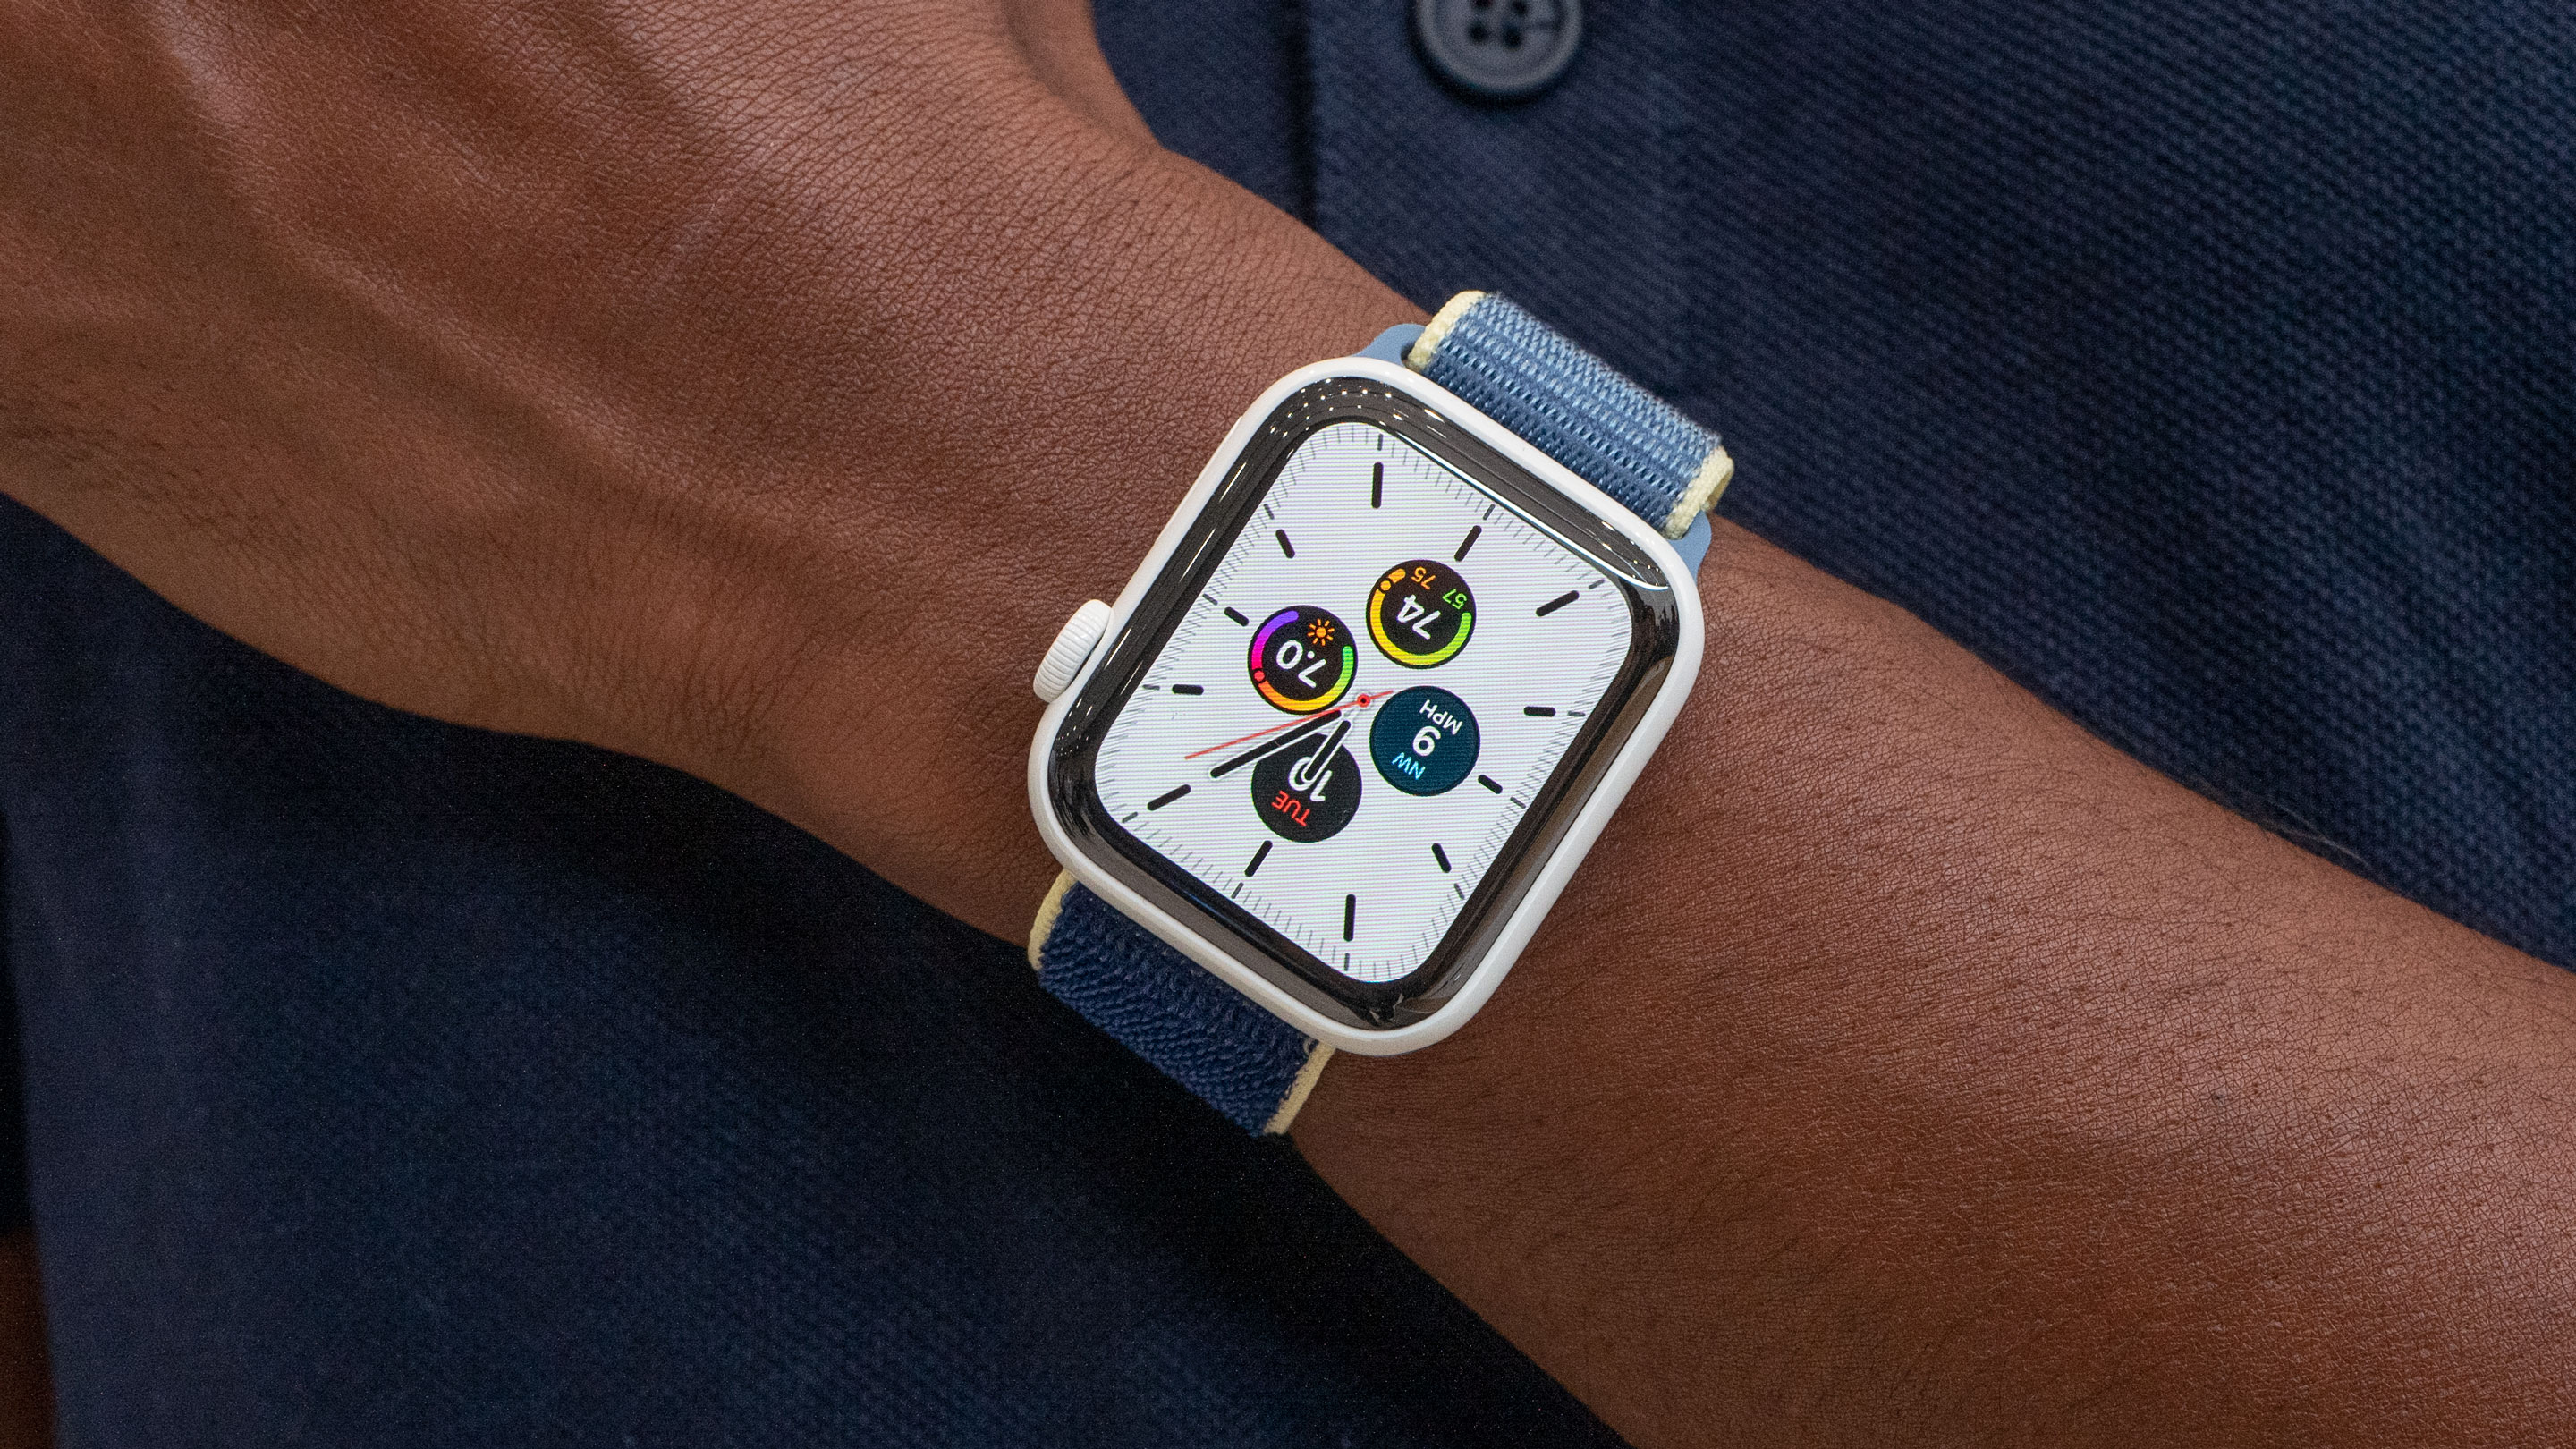 Introducing: The Apple Watch Series 5 (Live Pics & Pricing) - HODINKEE